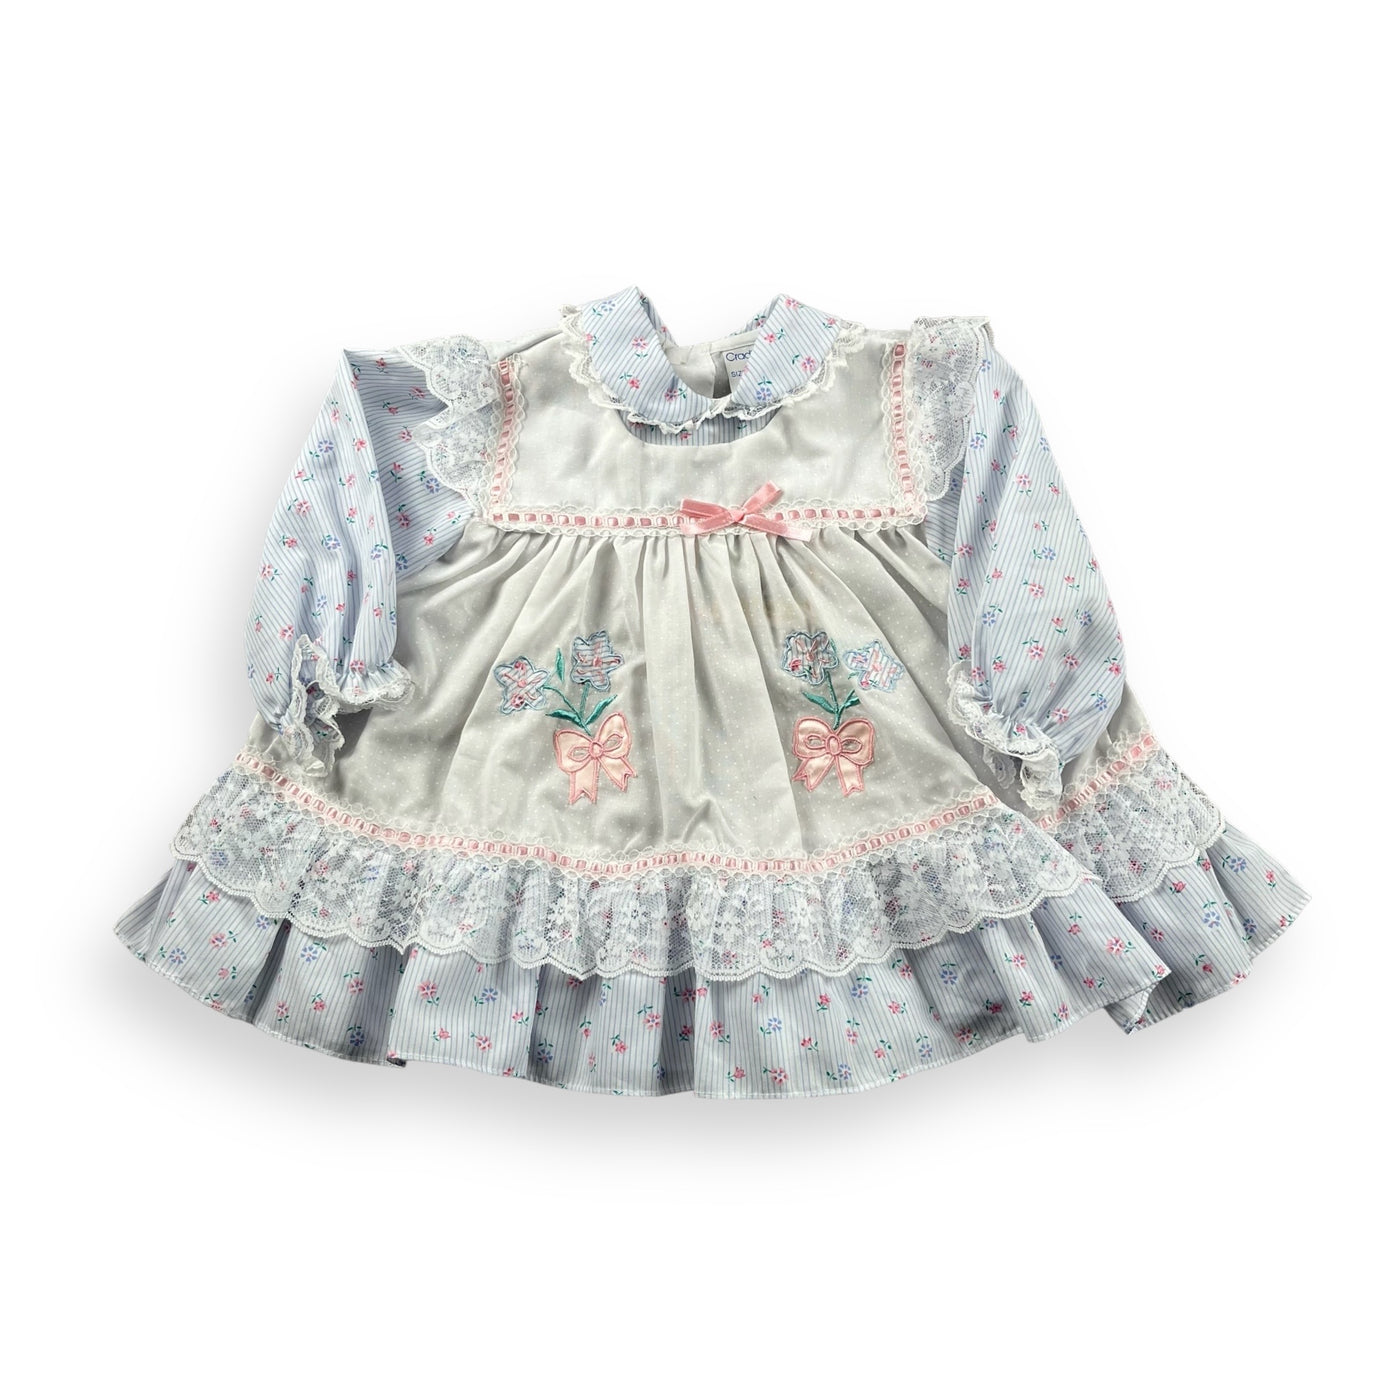 Vintage Floral & Bow Ruffled Lace Dress 9-12 Months